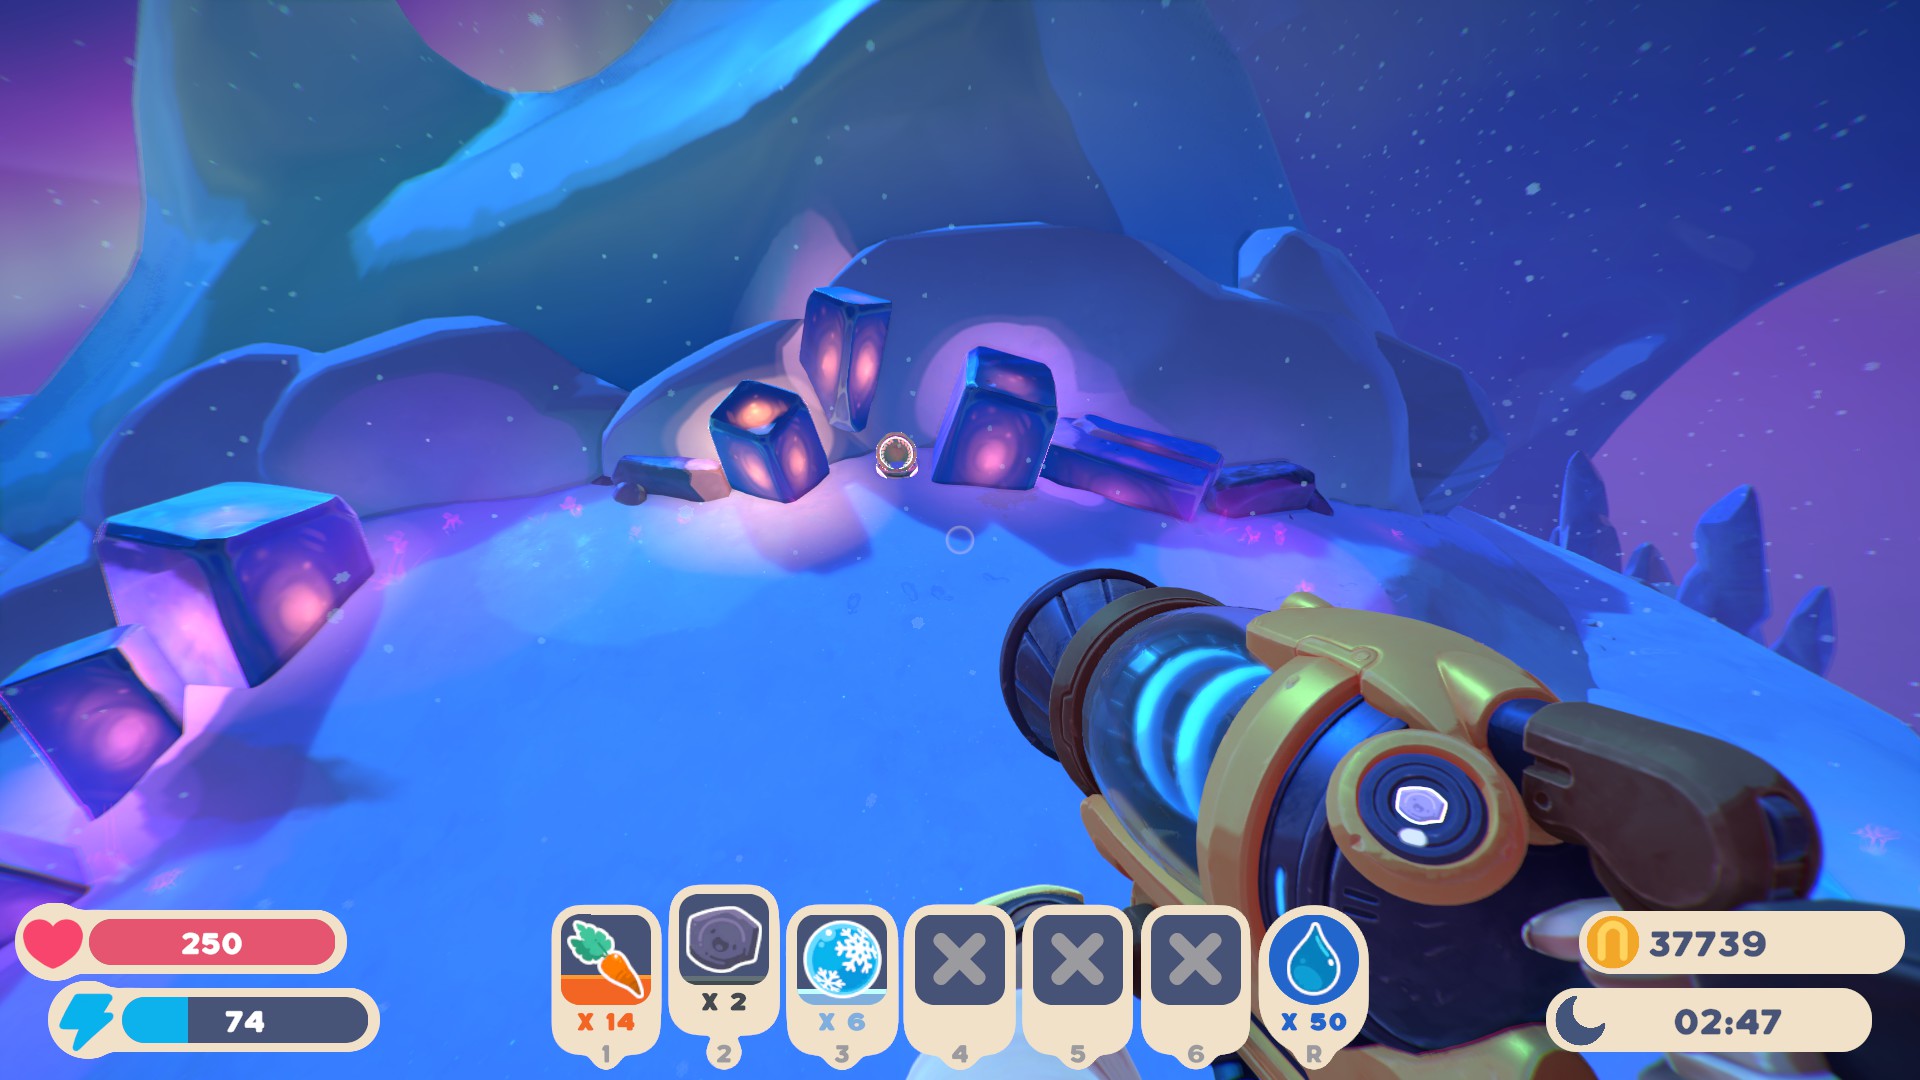 Slime Rancher 2 - Capsule Locations for Powderfall Bluffs - Pods 1 - 6 (Exterior I) - 1501E07